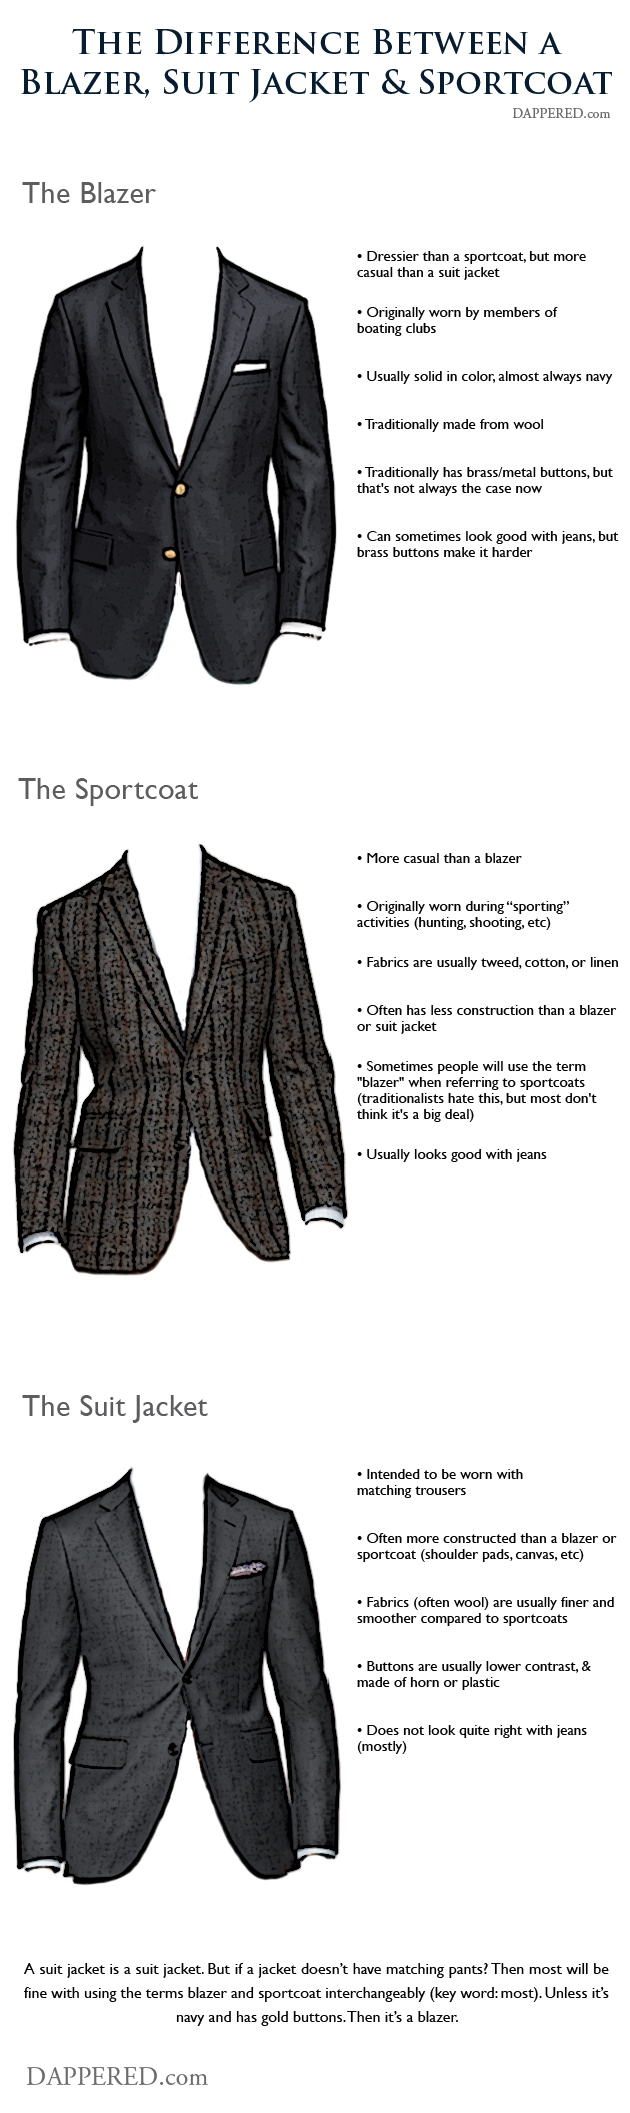 How To Tell The Difference Between A Blazer And Suit Jacket Hotmailav